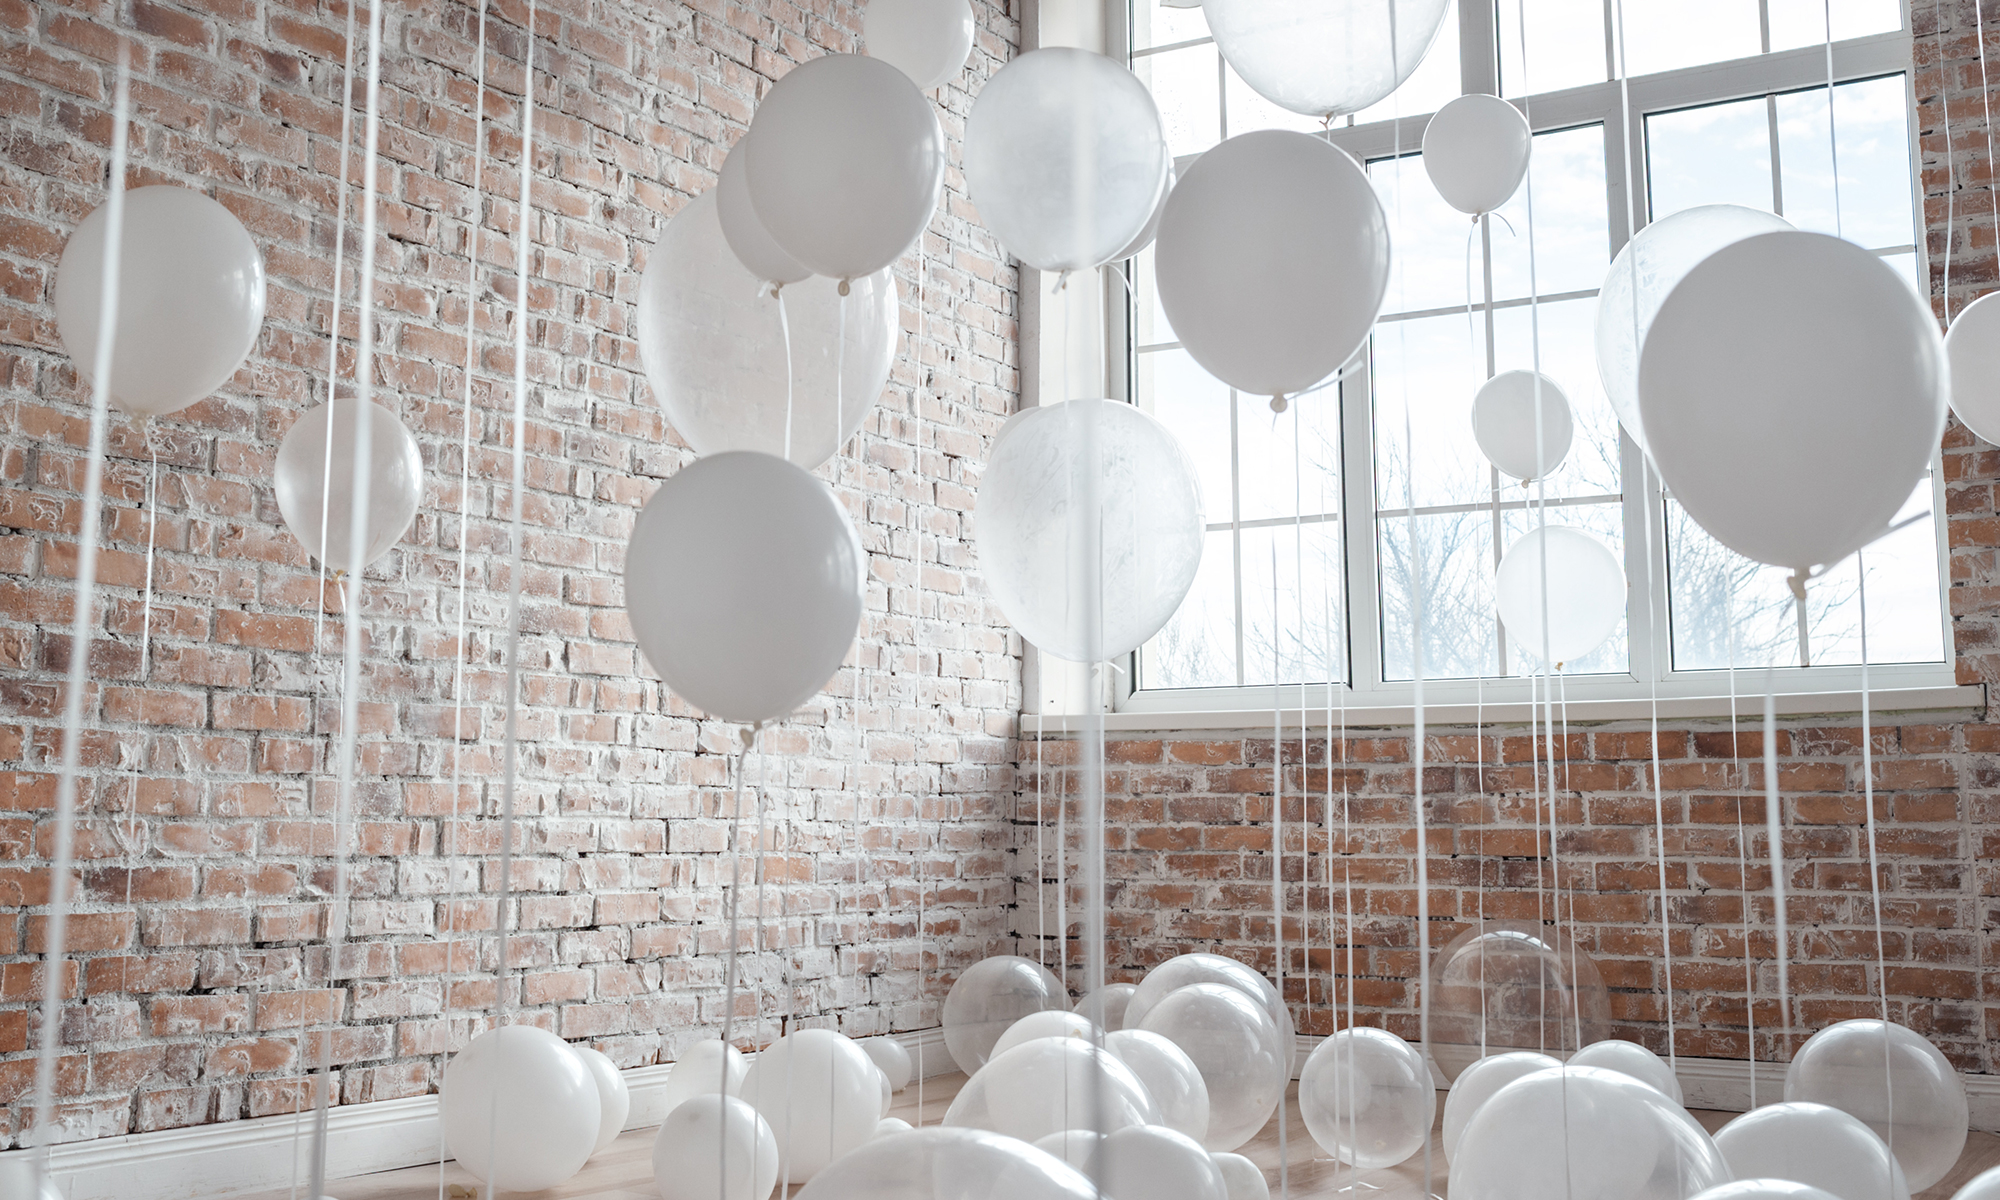 Decorating Your Reception Venue on a Budget